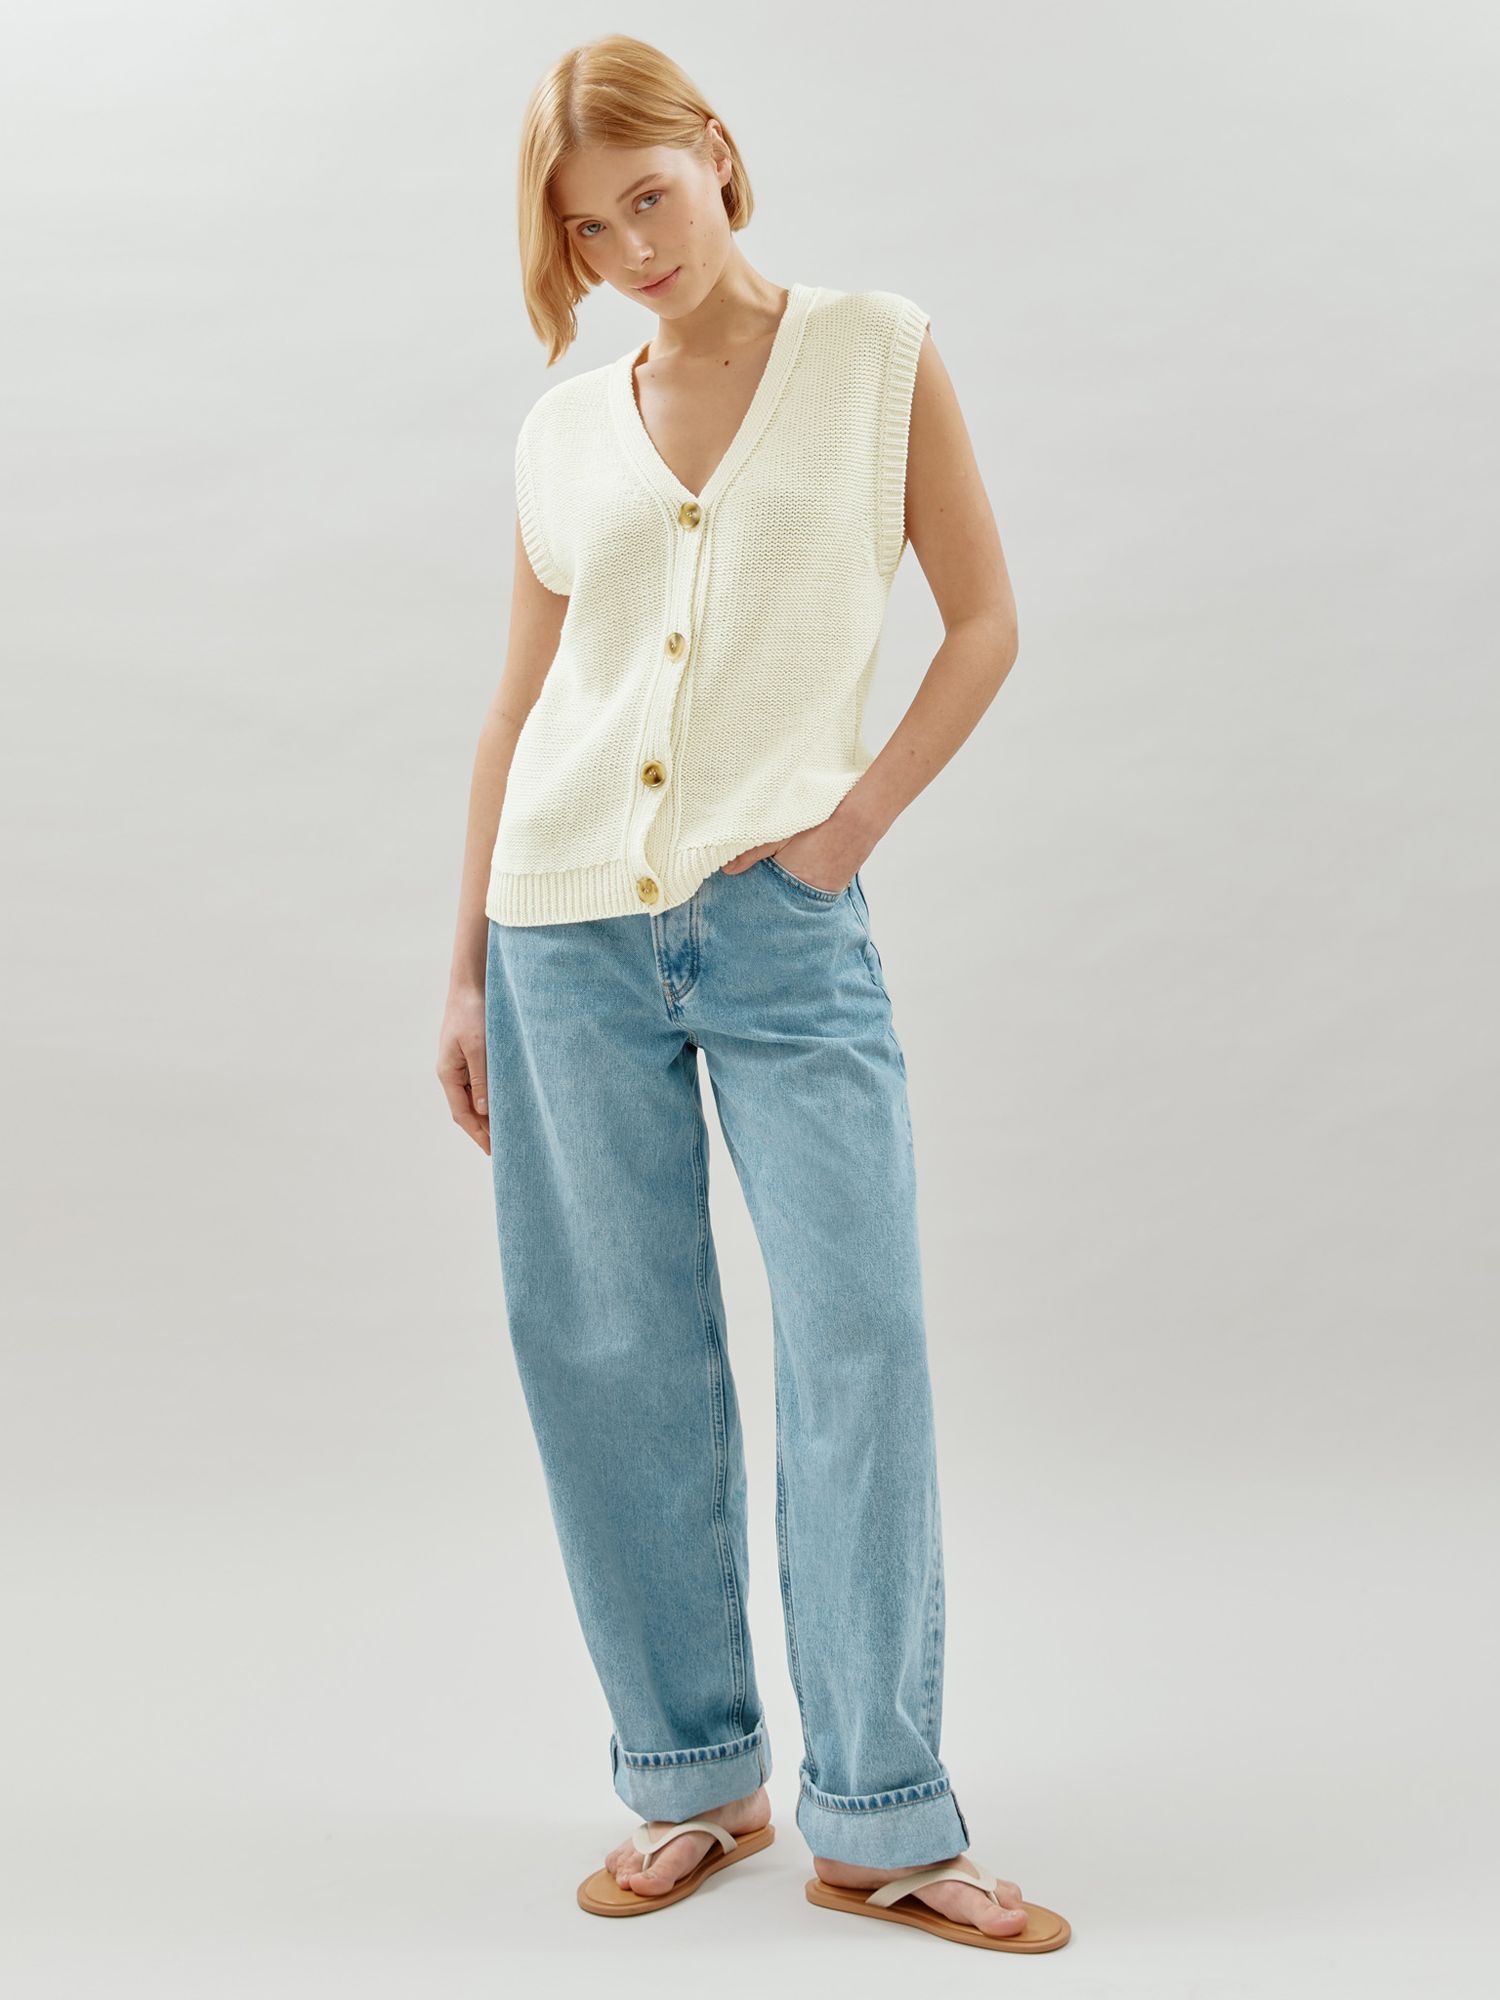 Buy Albaray Relaxed Knitted Waistcoat, Cream Online at johnlewis.com